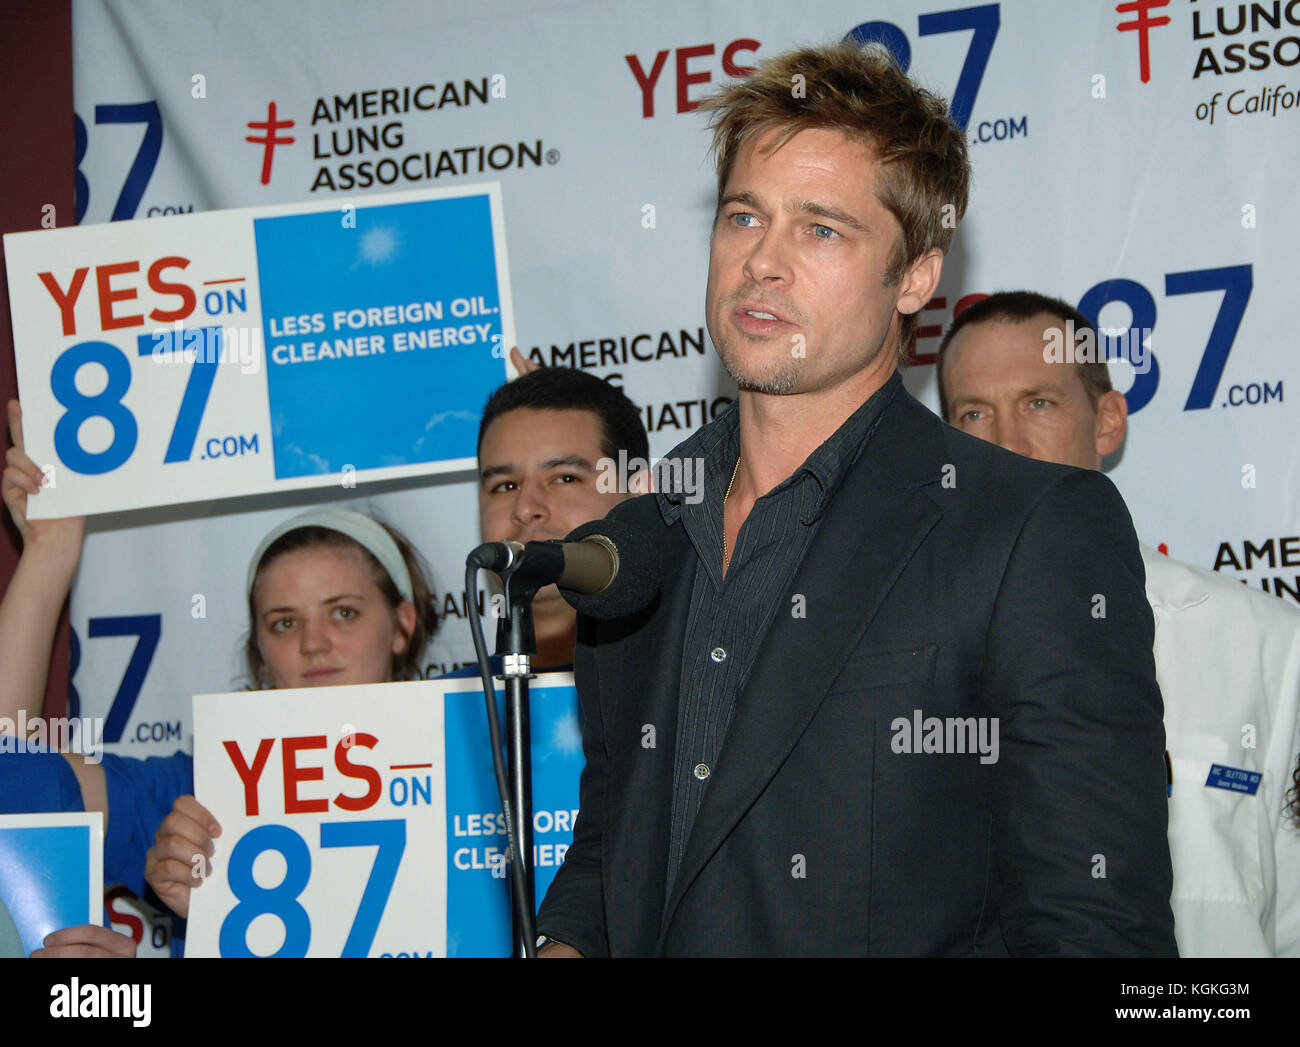 Brad Pitt and Los Angeles mayor Antonio Villaraigosa  at the L.A. Labor Headquarters for a get out and vote YES on 87.  headshot full length smile Brad Pitt 011  = Brad Pitt attending, People, Vertical, USA, Los Angeles, Actor, Film Premiere,  Photography, Red Carpet Event, Brad Pitt - Actor, Arts Culture and Entertainment, , Celebrities, Stock Photo